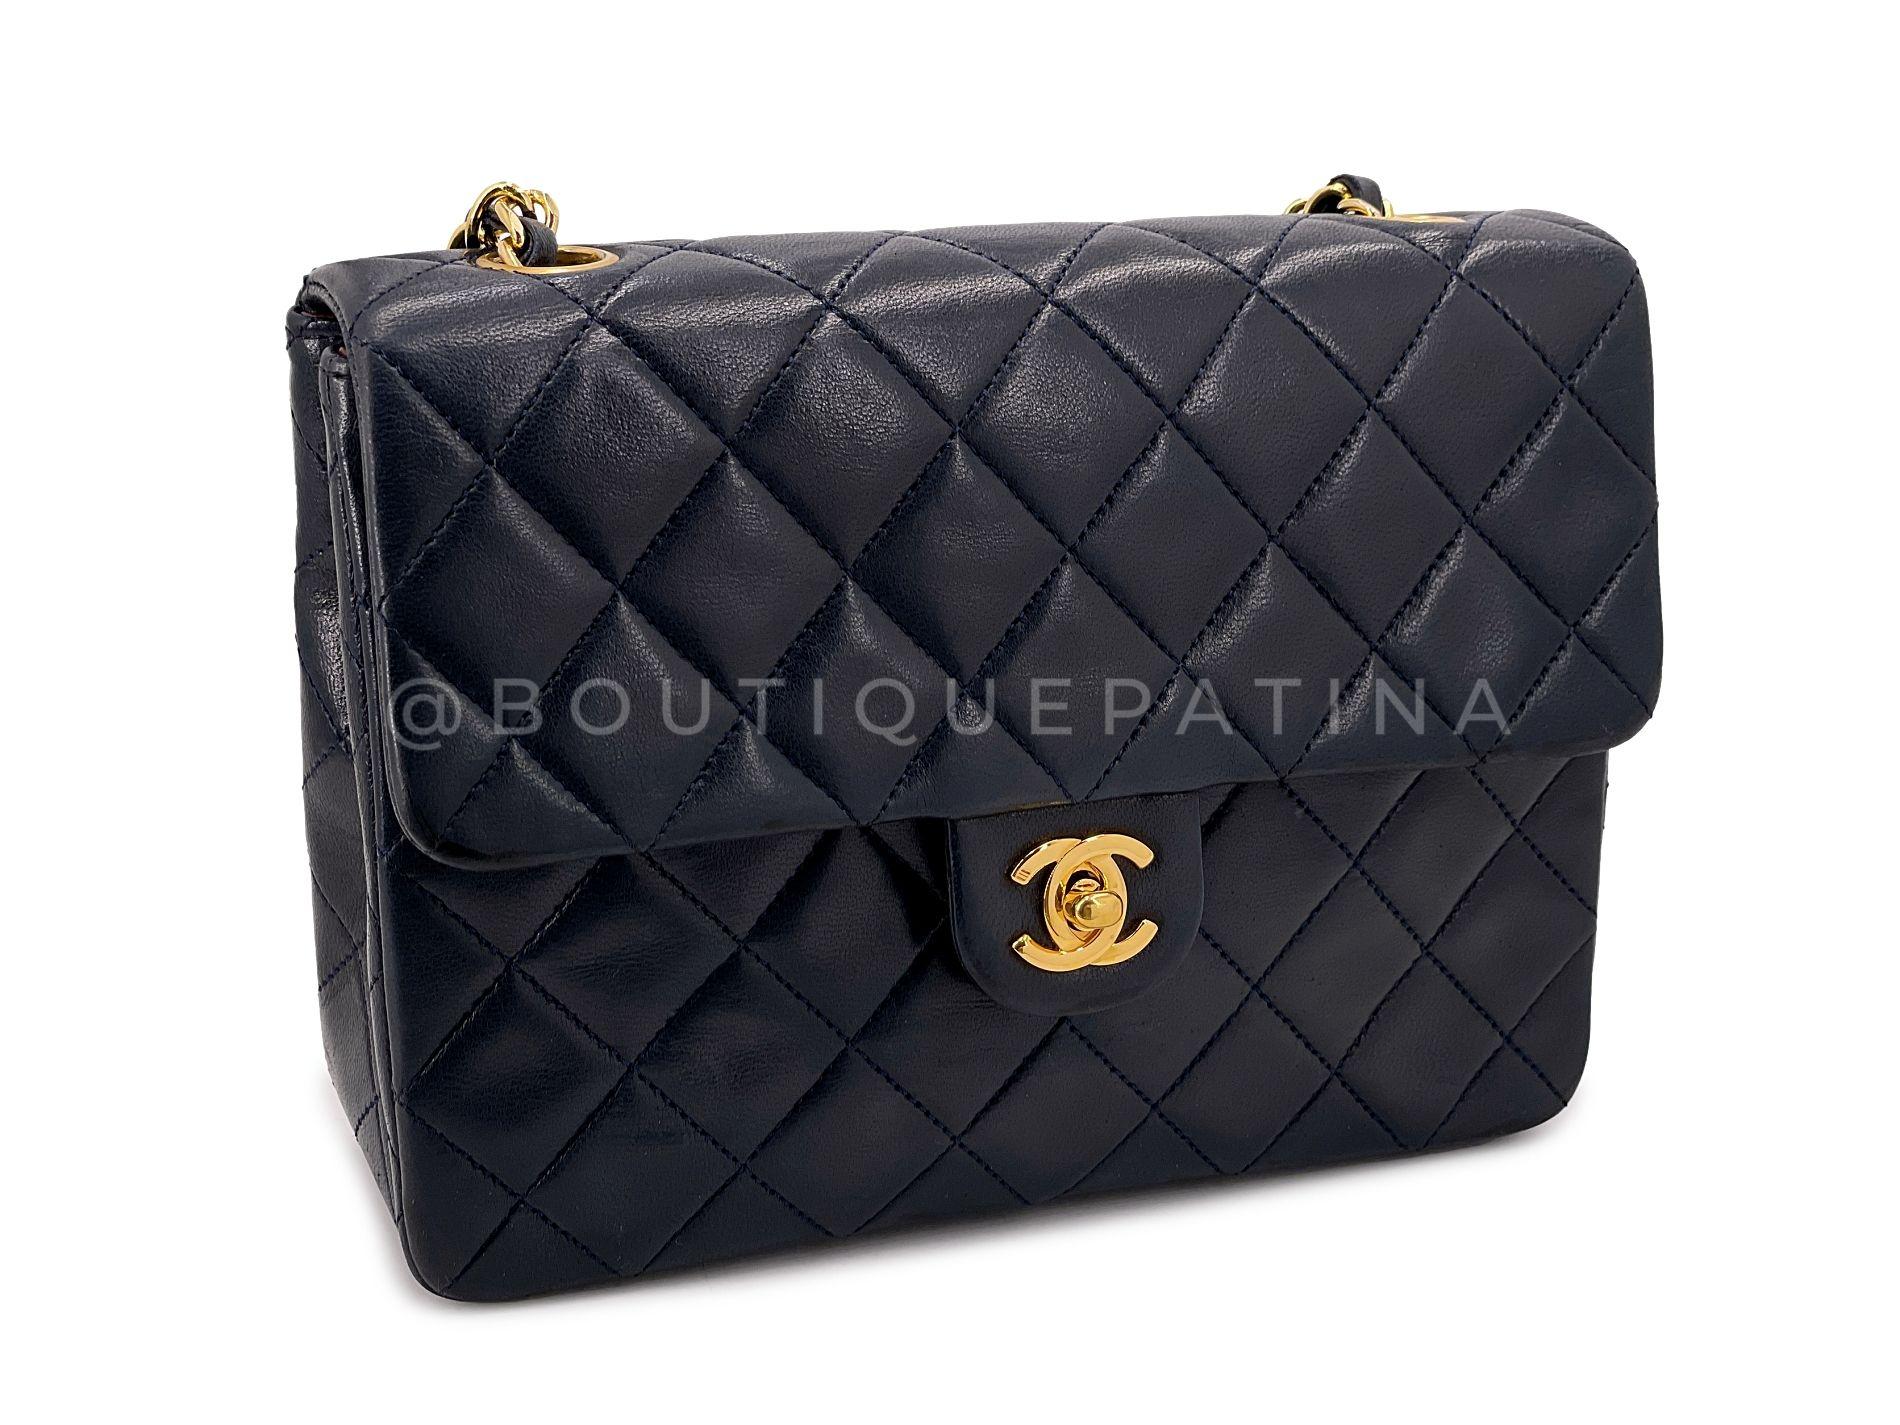 Chanel Vintage 1990 Black Mini Flap Bag Classic Lambskin 20cm 24k GHW 67940 In Excellent Condition For Sale In Costa Mesa, CA